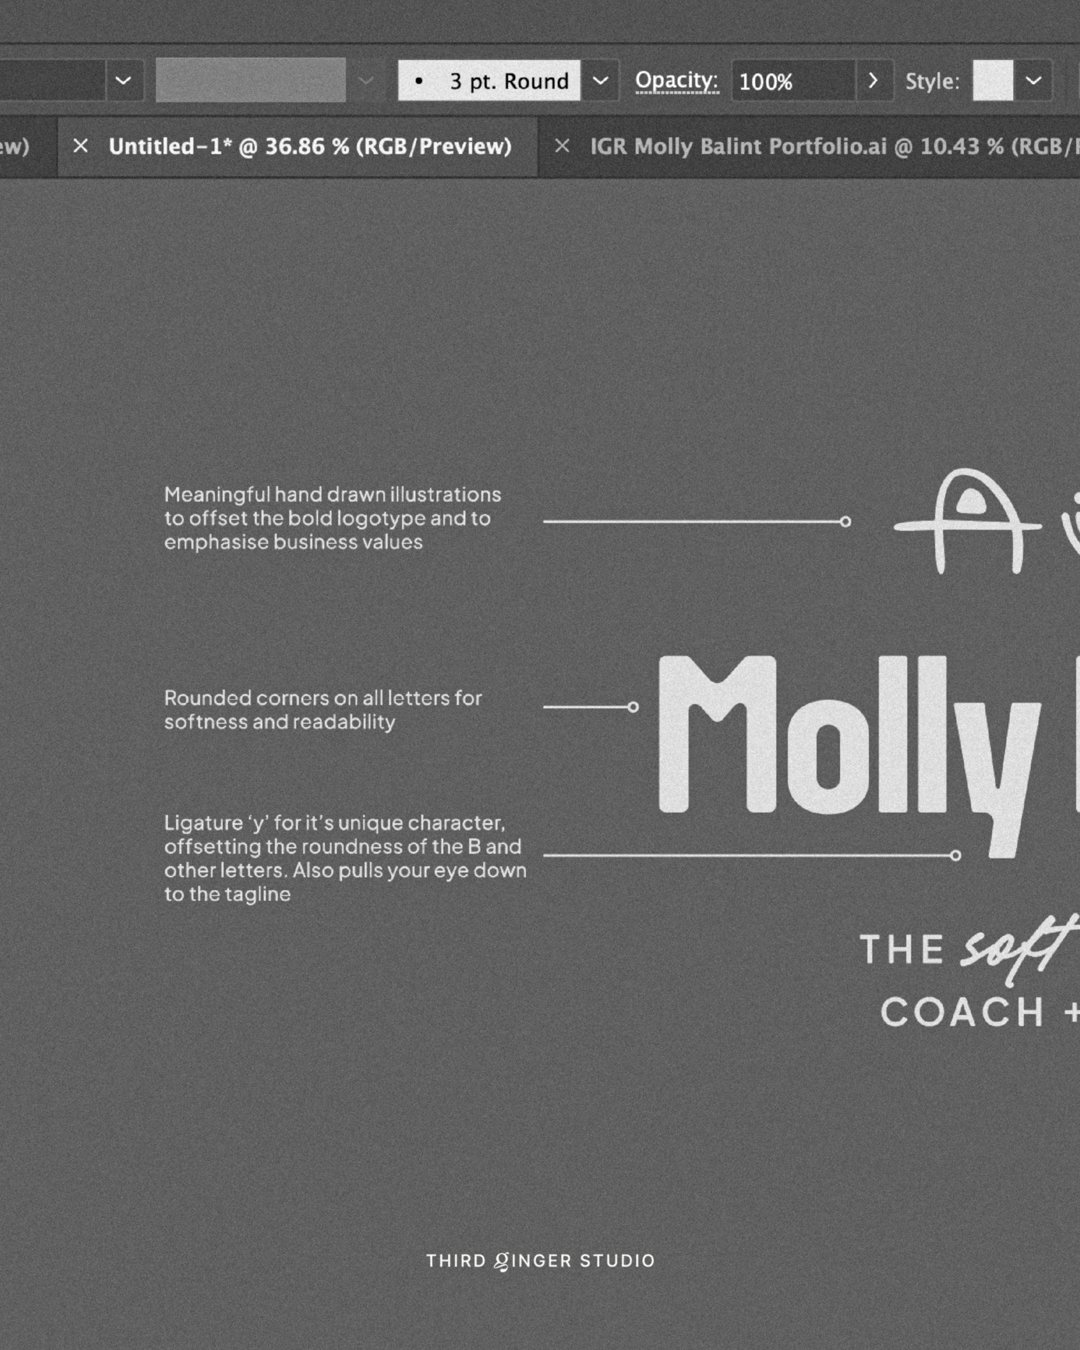 Molly had 1 change to her logo. One.⁣
⁣
Now, here's why strategic design decisions are important. Her one and only comment was to change the 'y' in her name.⁣
⁣
As a business coach and mentor, that whole market can be saturated. But Molly is a SOFT b